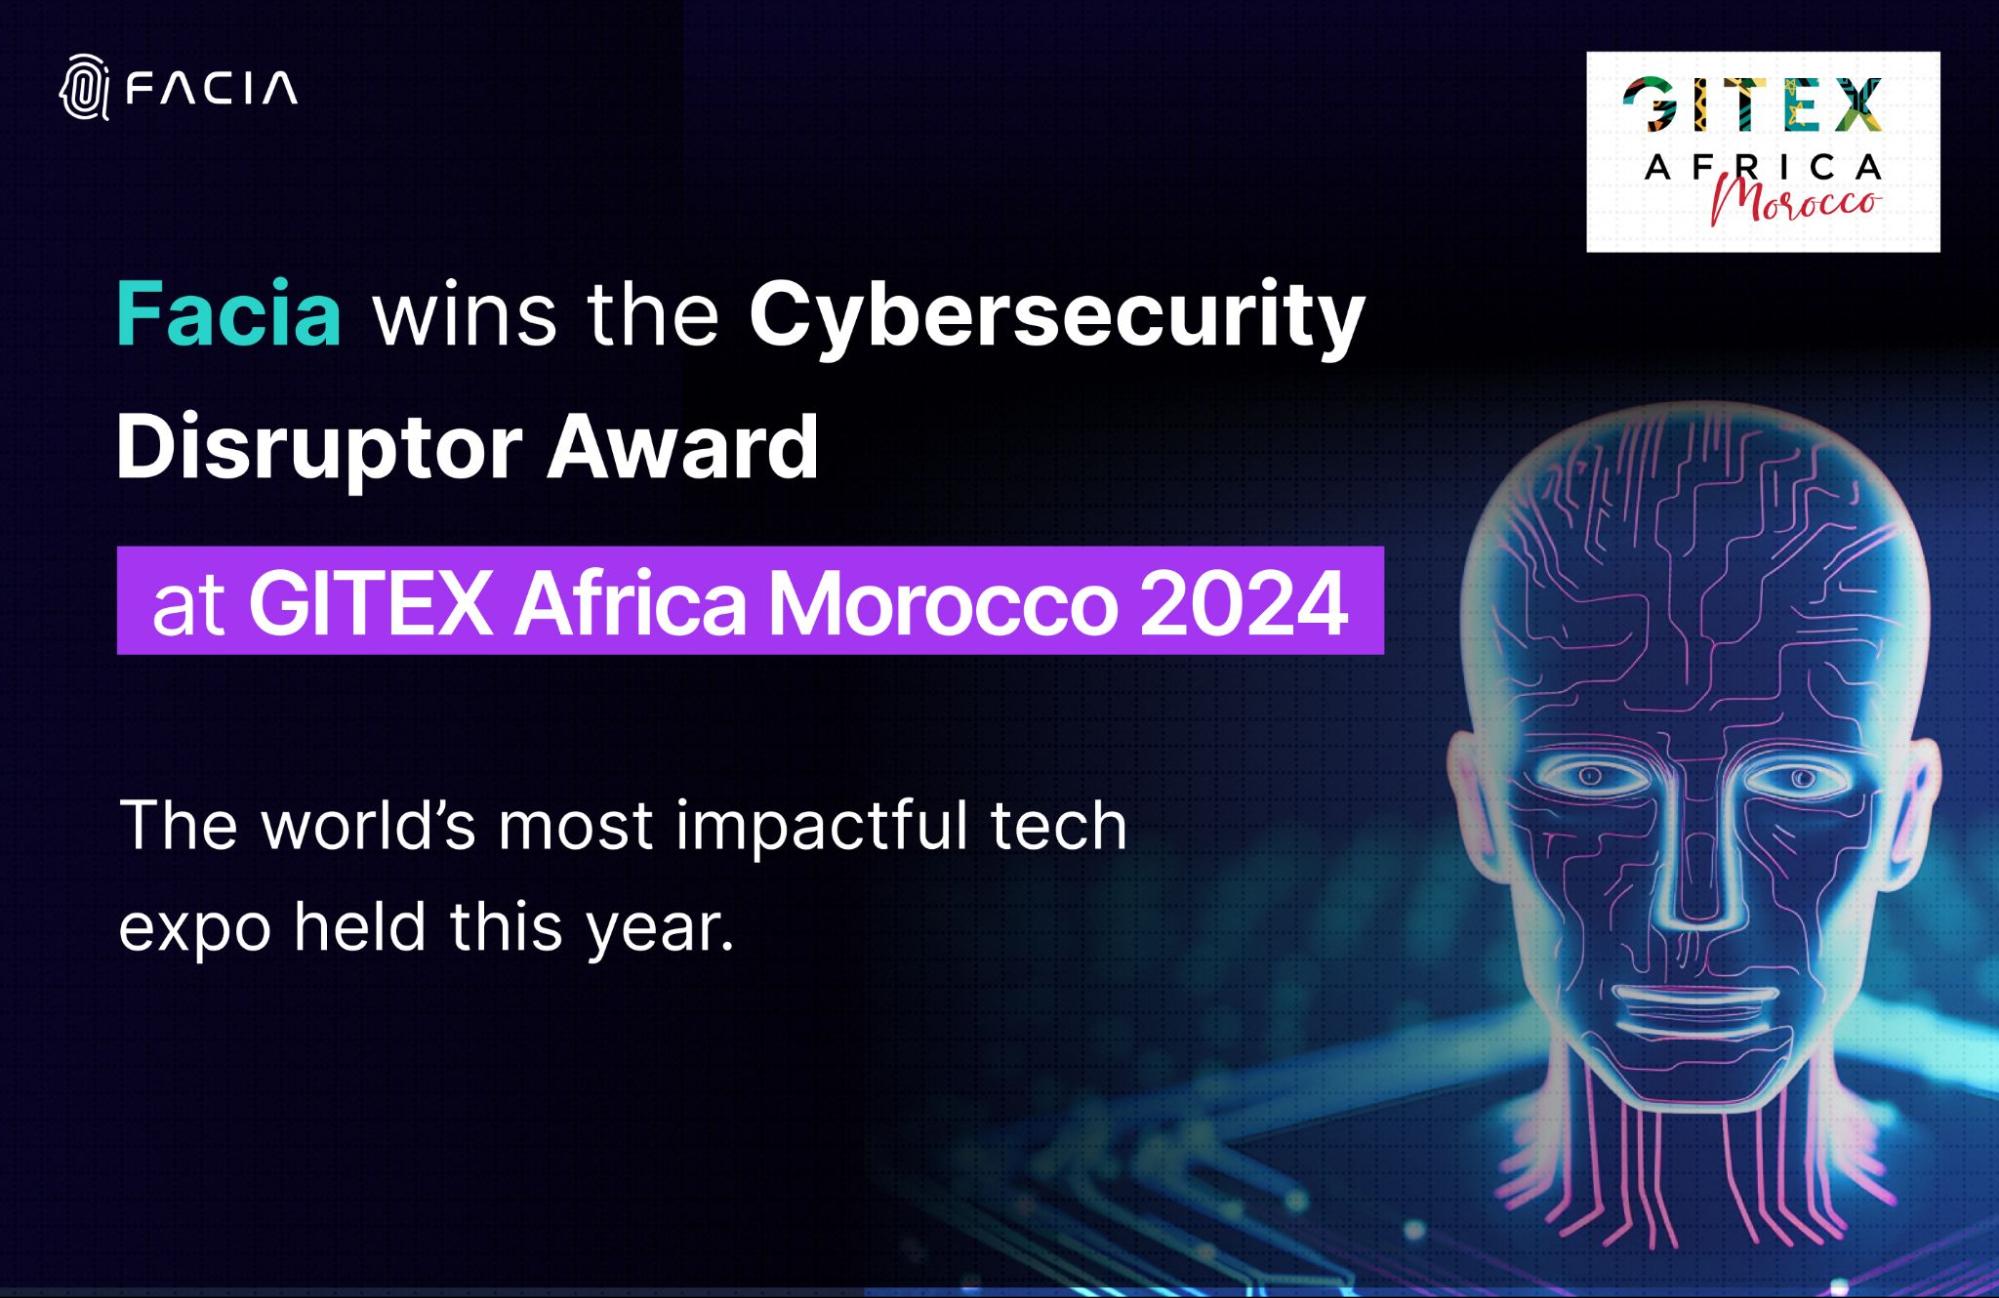 Facia wins the Cybersecurity Disruptor Award at GITEX Africa Morocco 2024, the world’s most impactful tech expo held this year.